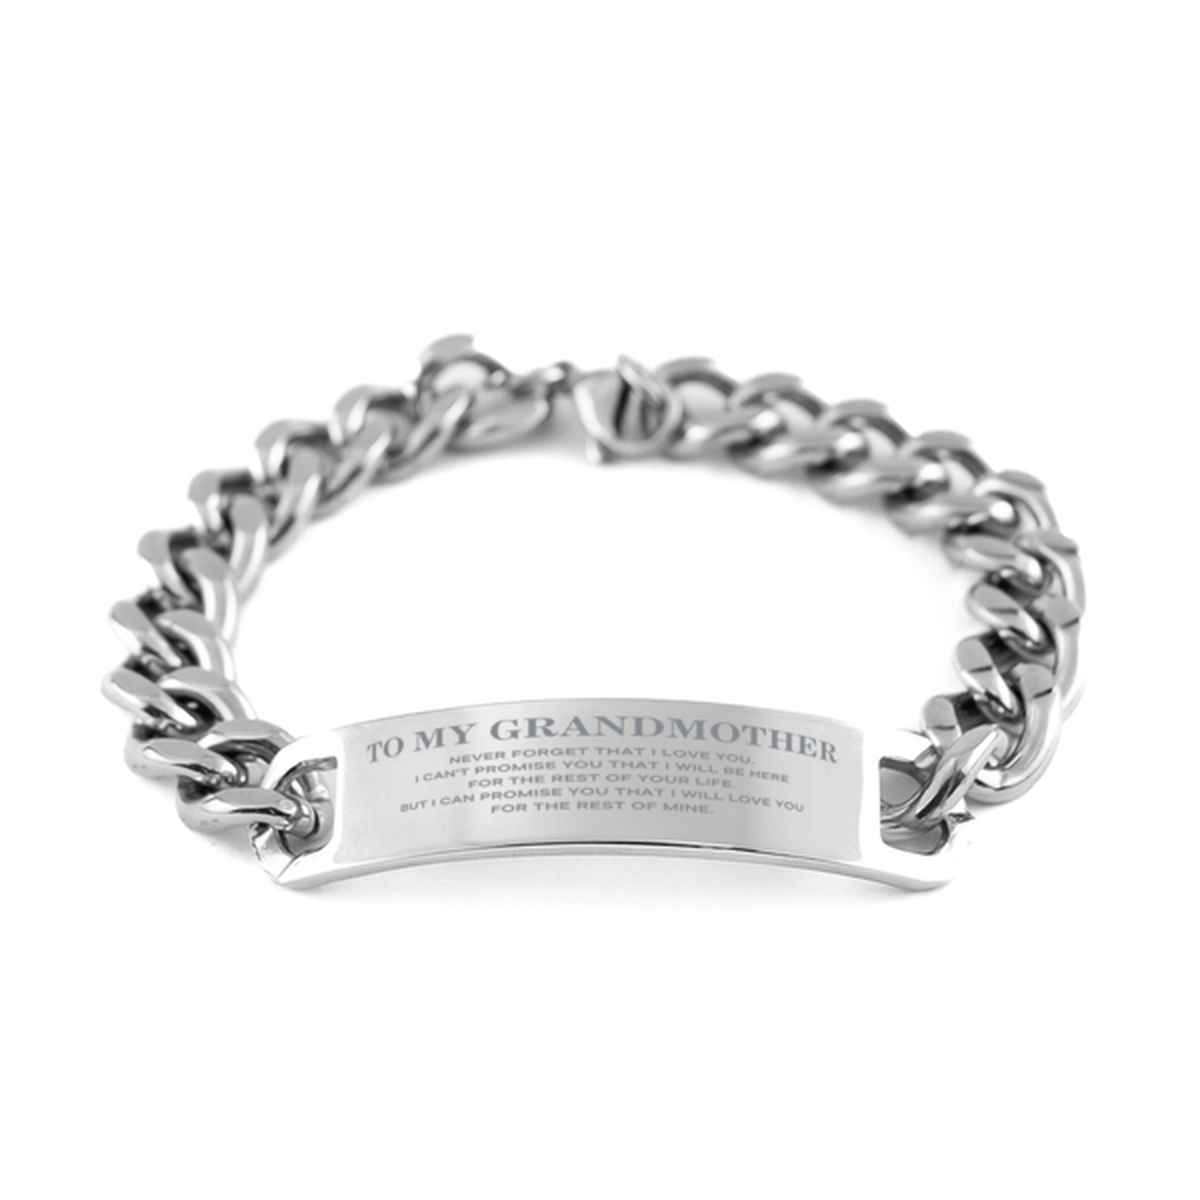 To My Grandmother Gifts, I will love you for the rest of mine, Love Grandmother Bracelet, Birthday Christmas Unique Cuban Chain Stainless Steel Bracelet For Grandmother